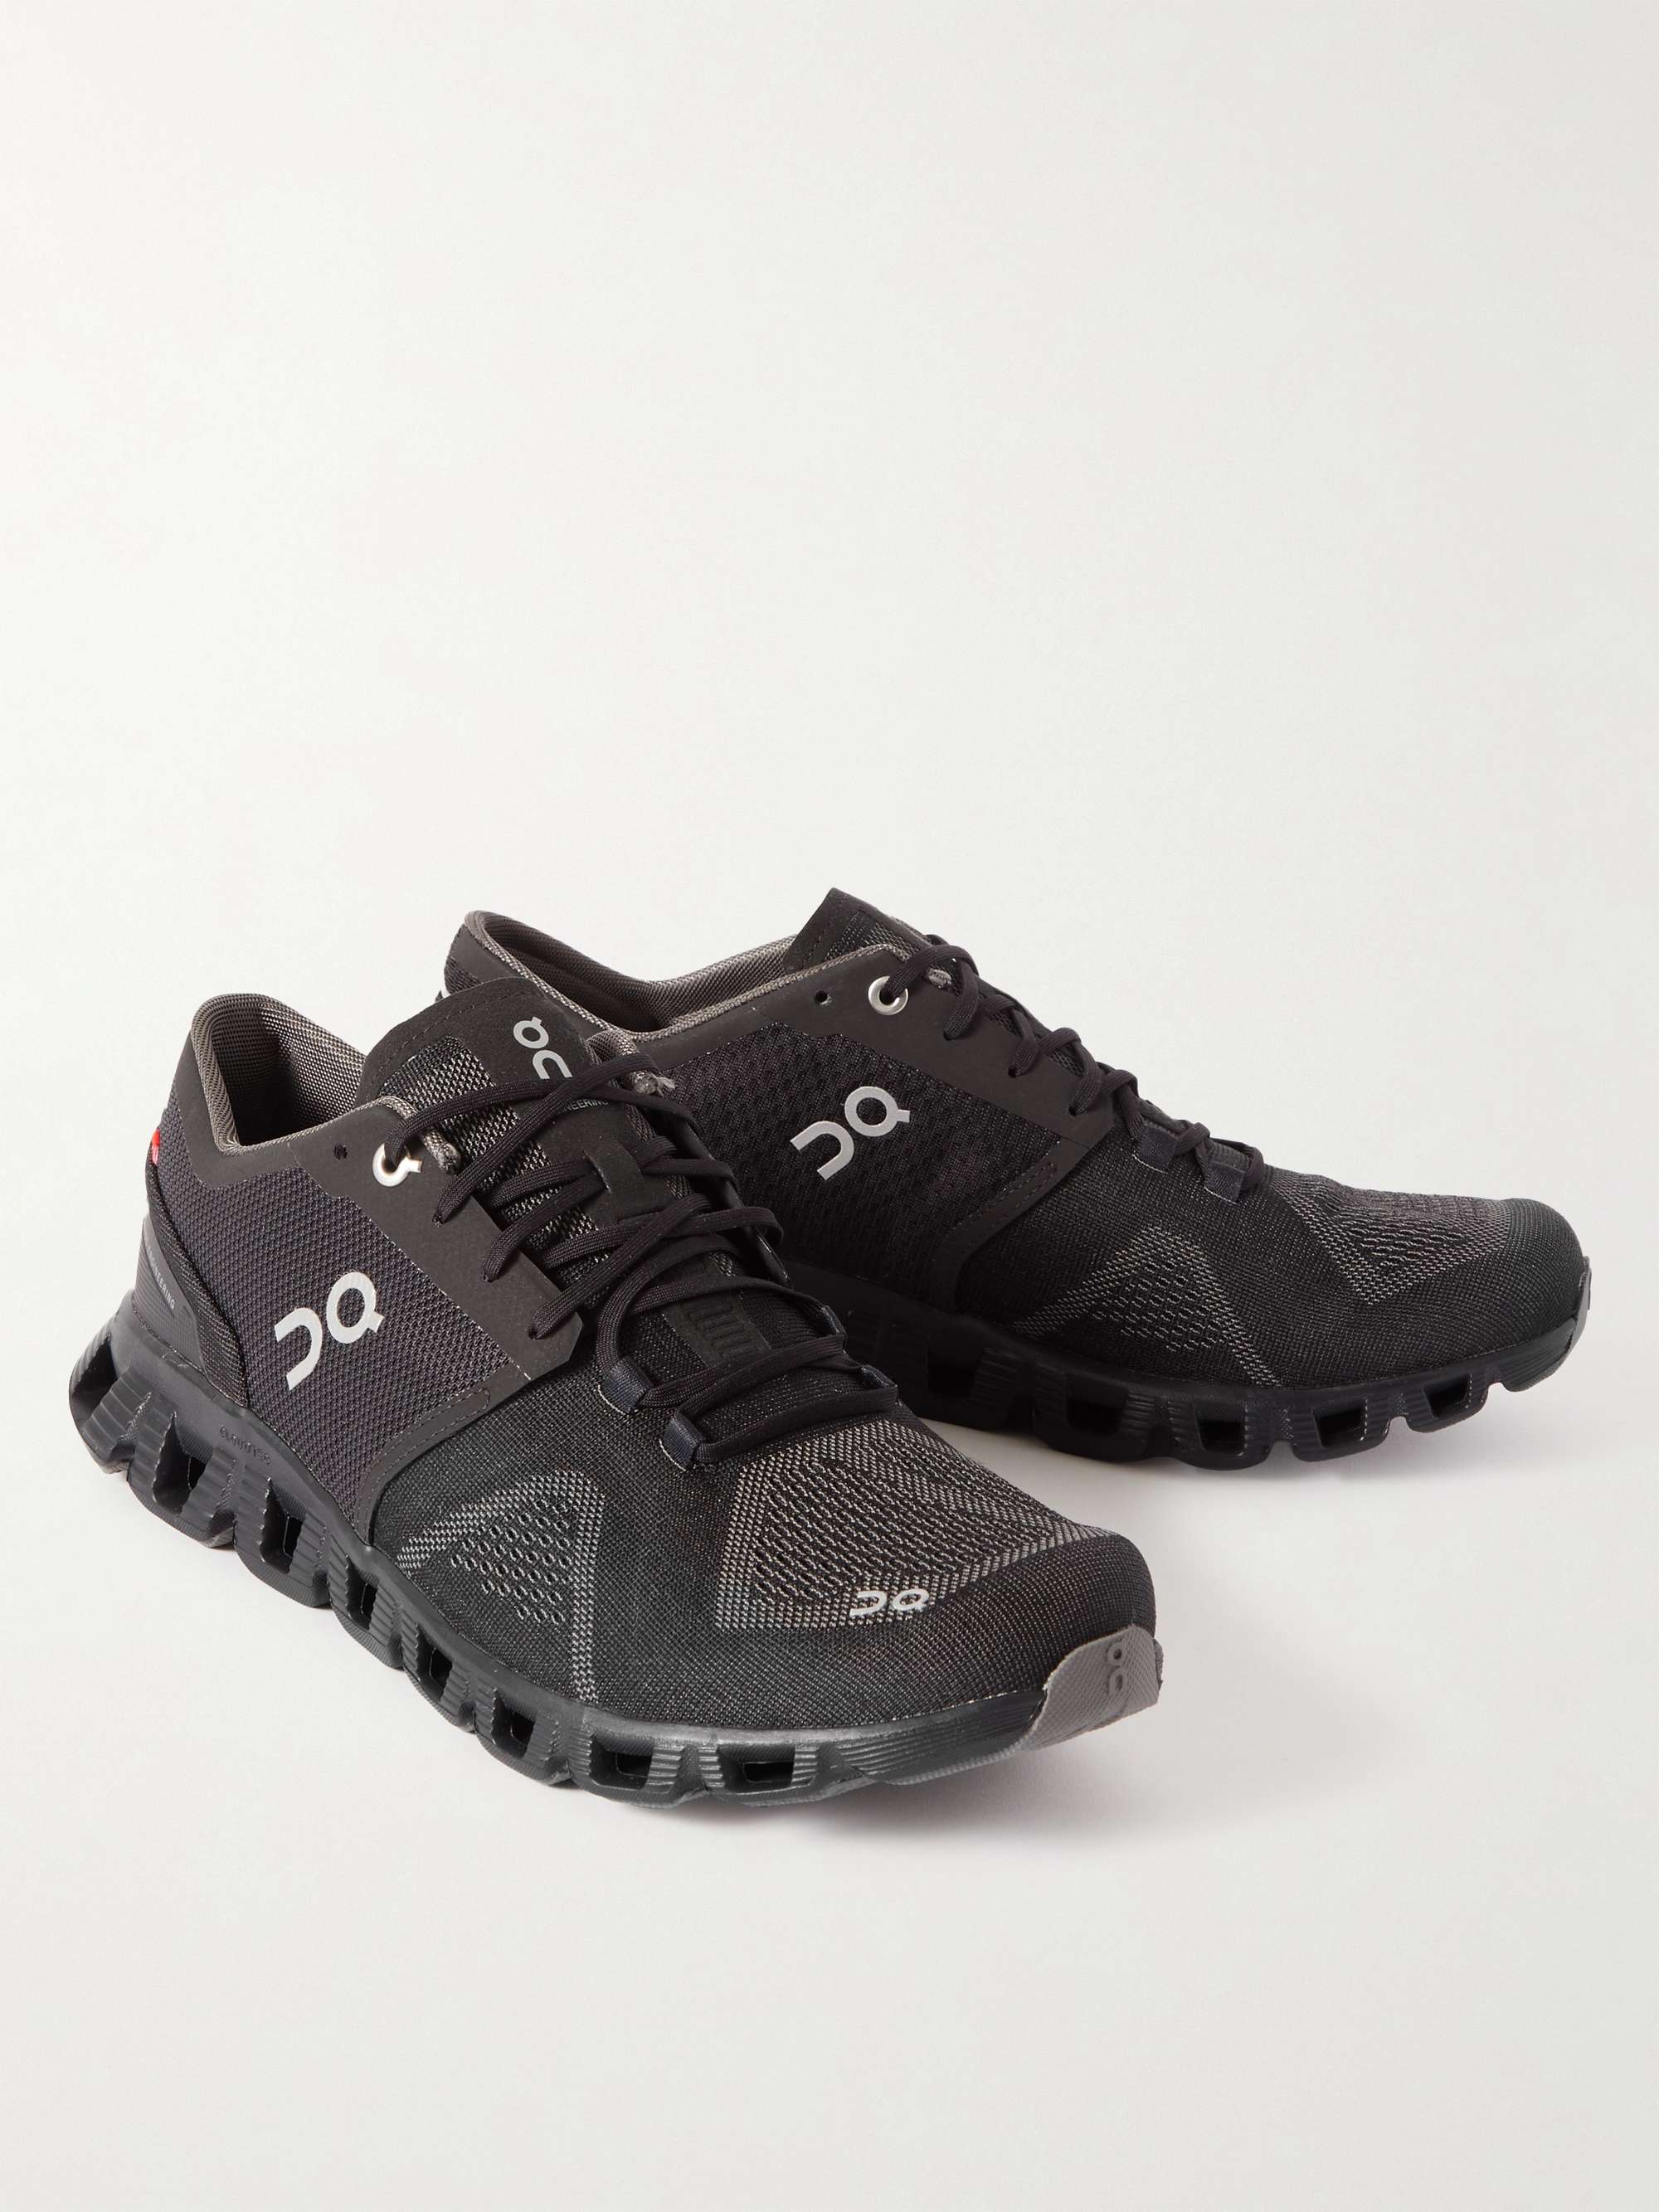 ON Cloud X Rubber-Trimmed Mesh Running Sneakers